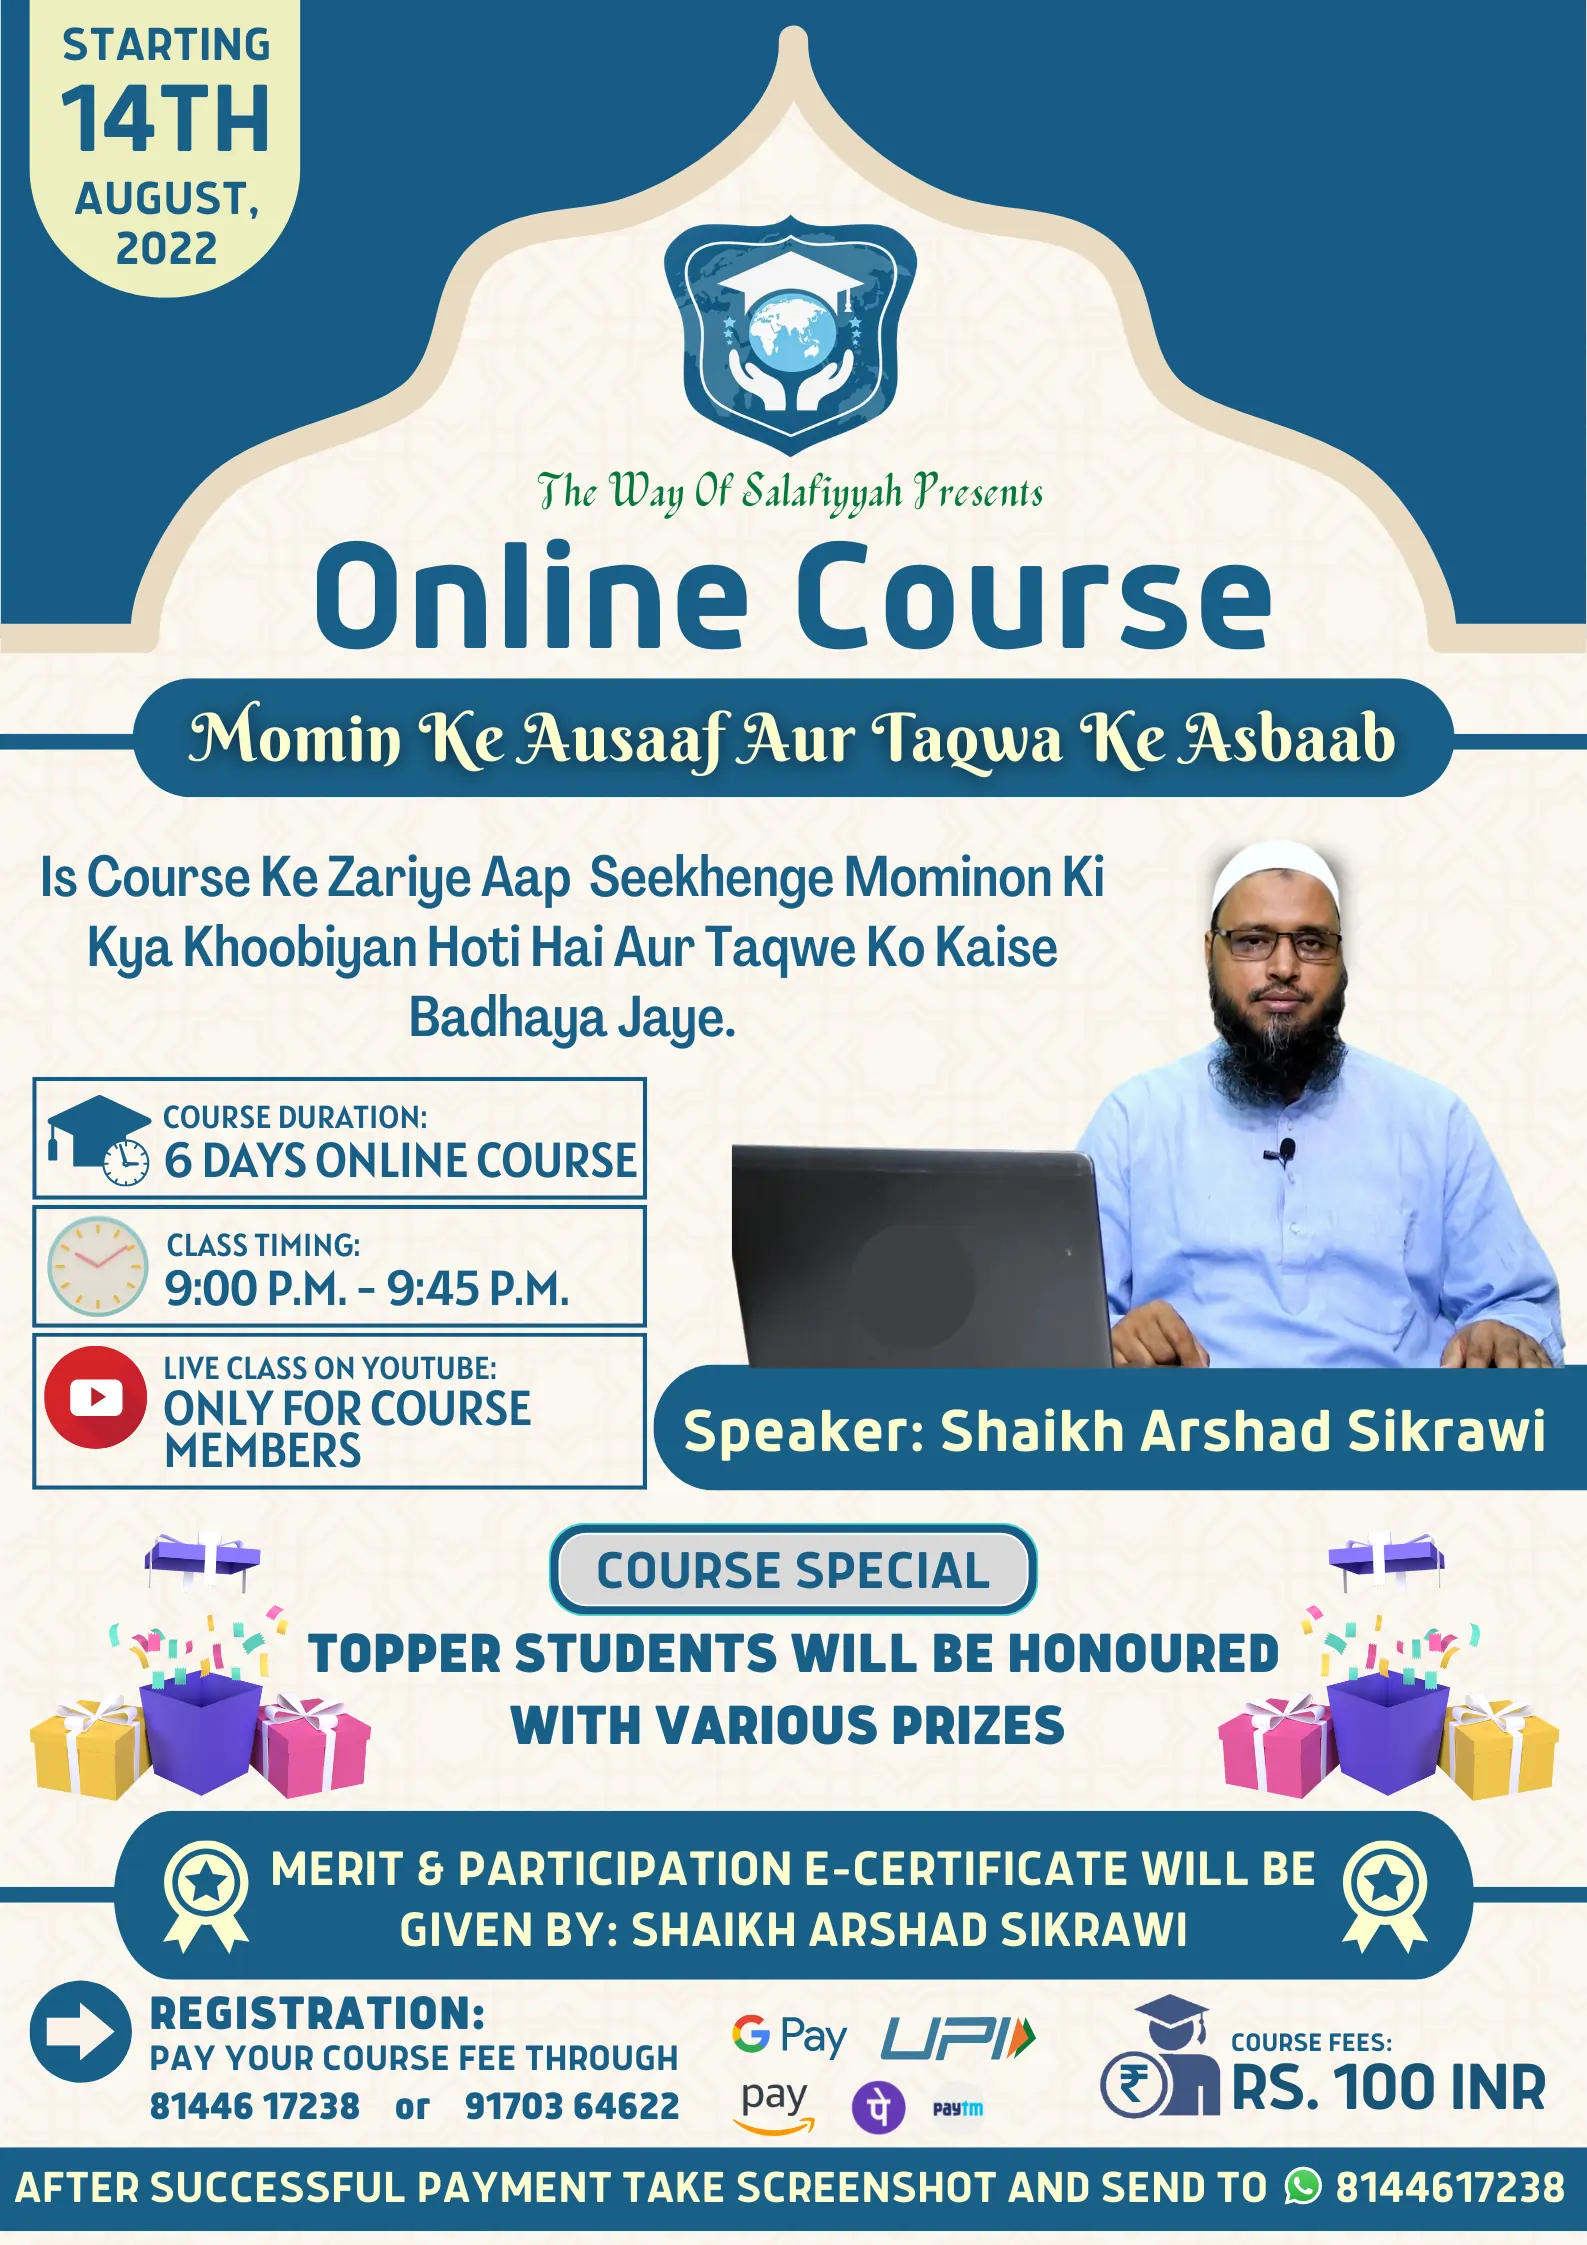 Online Course The Way Of Salafiyyah